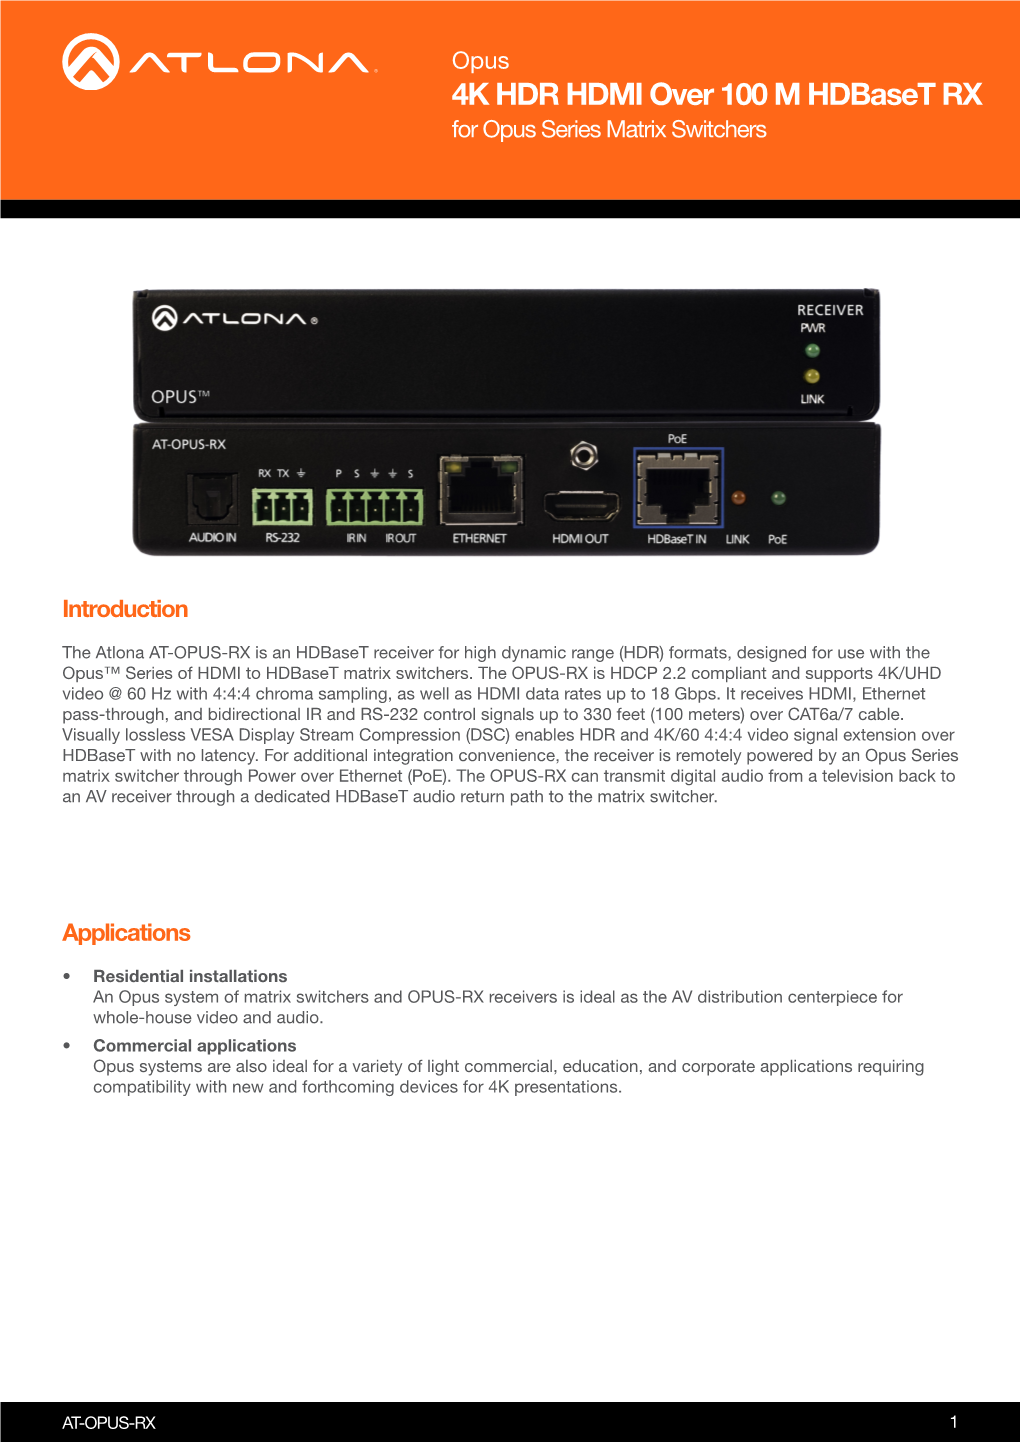 4K HDR HDMI Over 100 M Hdbaset RX for Opus Series Matrix Switchers